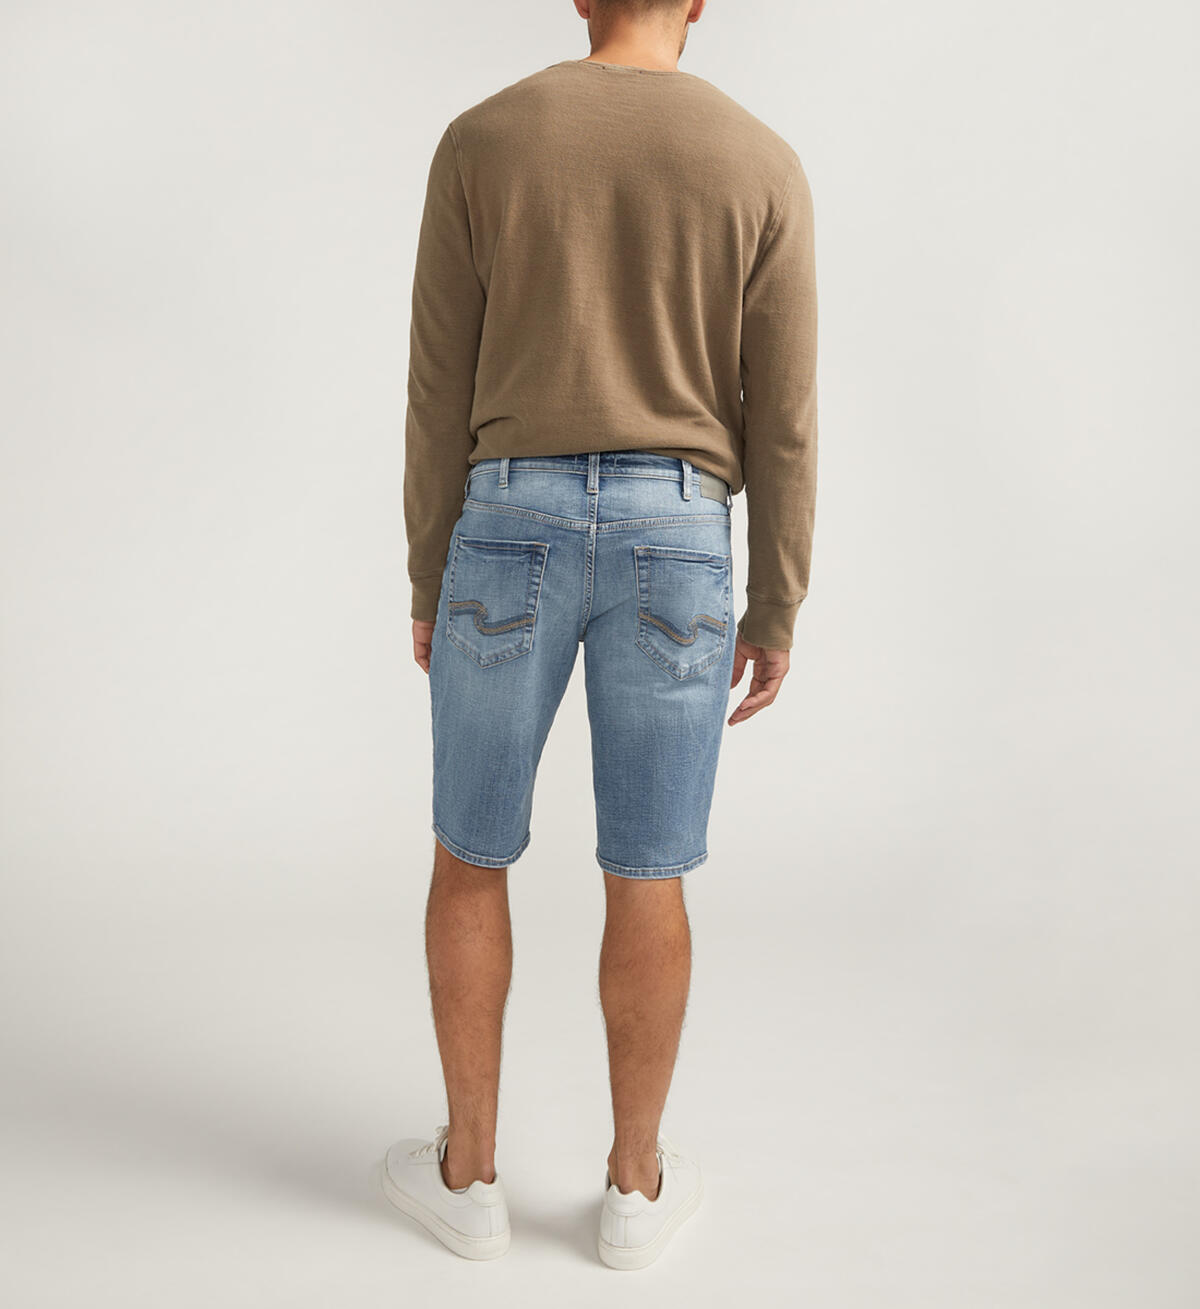 Zac Relaxed Fit Shorts, , hi-res image number 1